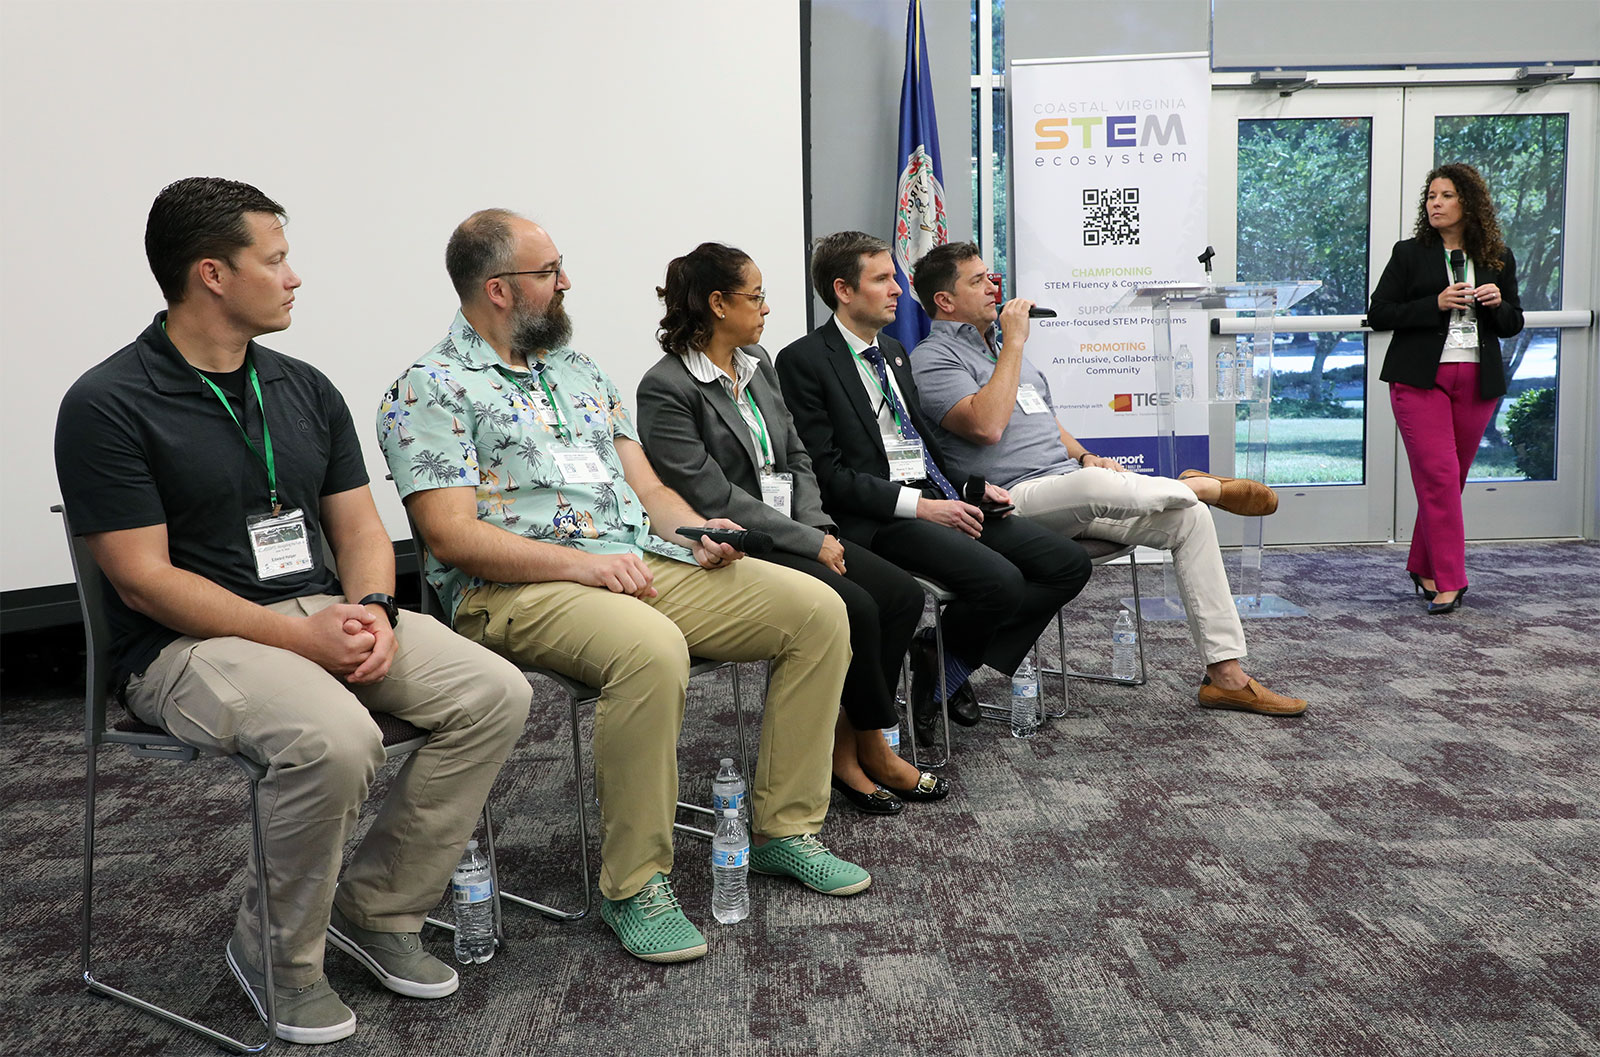 Christa Krohn, the facilitator and keynote speaker, led a panel discussion with, from left, Edward Halper, Ian Taylor, Lisa Surles-Law, Reeve Bull and Jeff Corbett.